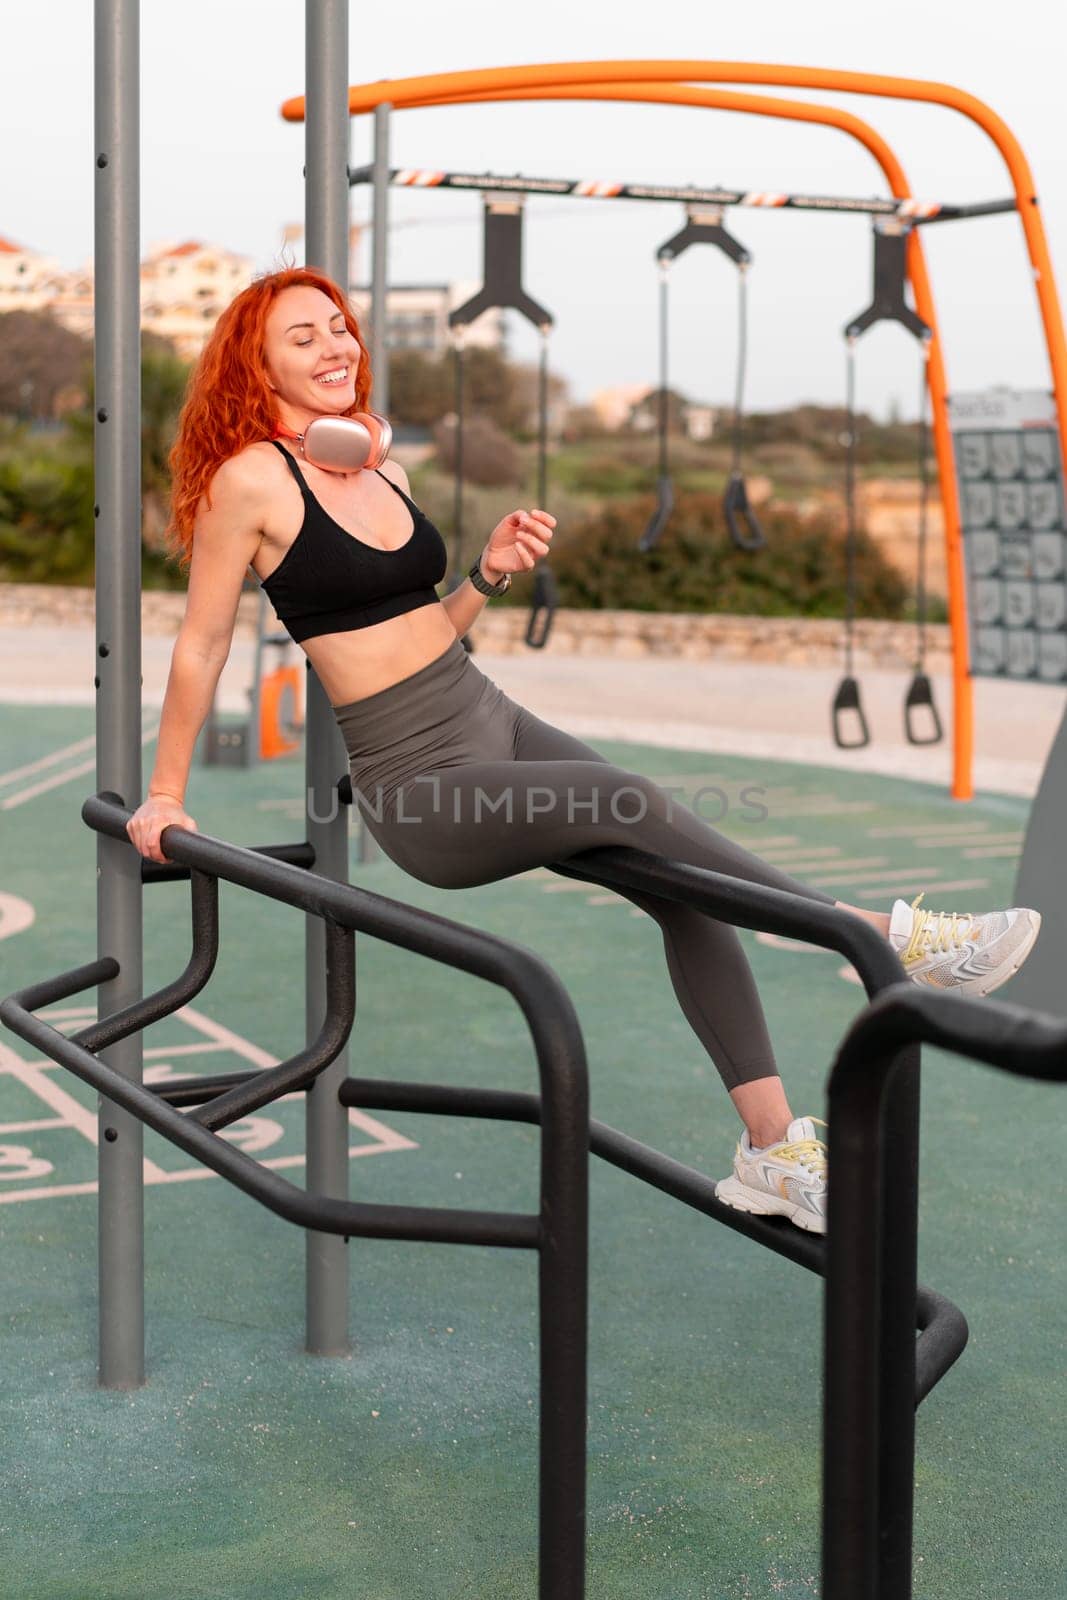 Happy woman jogger sitting on exercise equipment at gym park by andreonegin